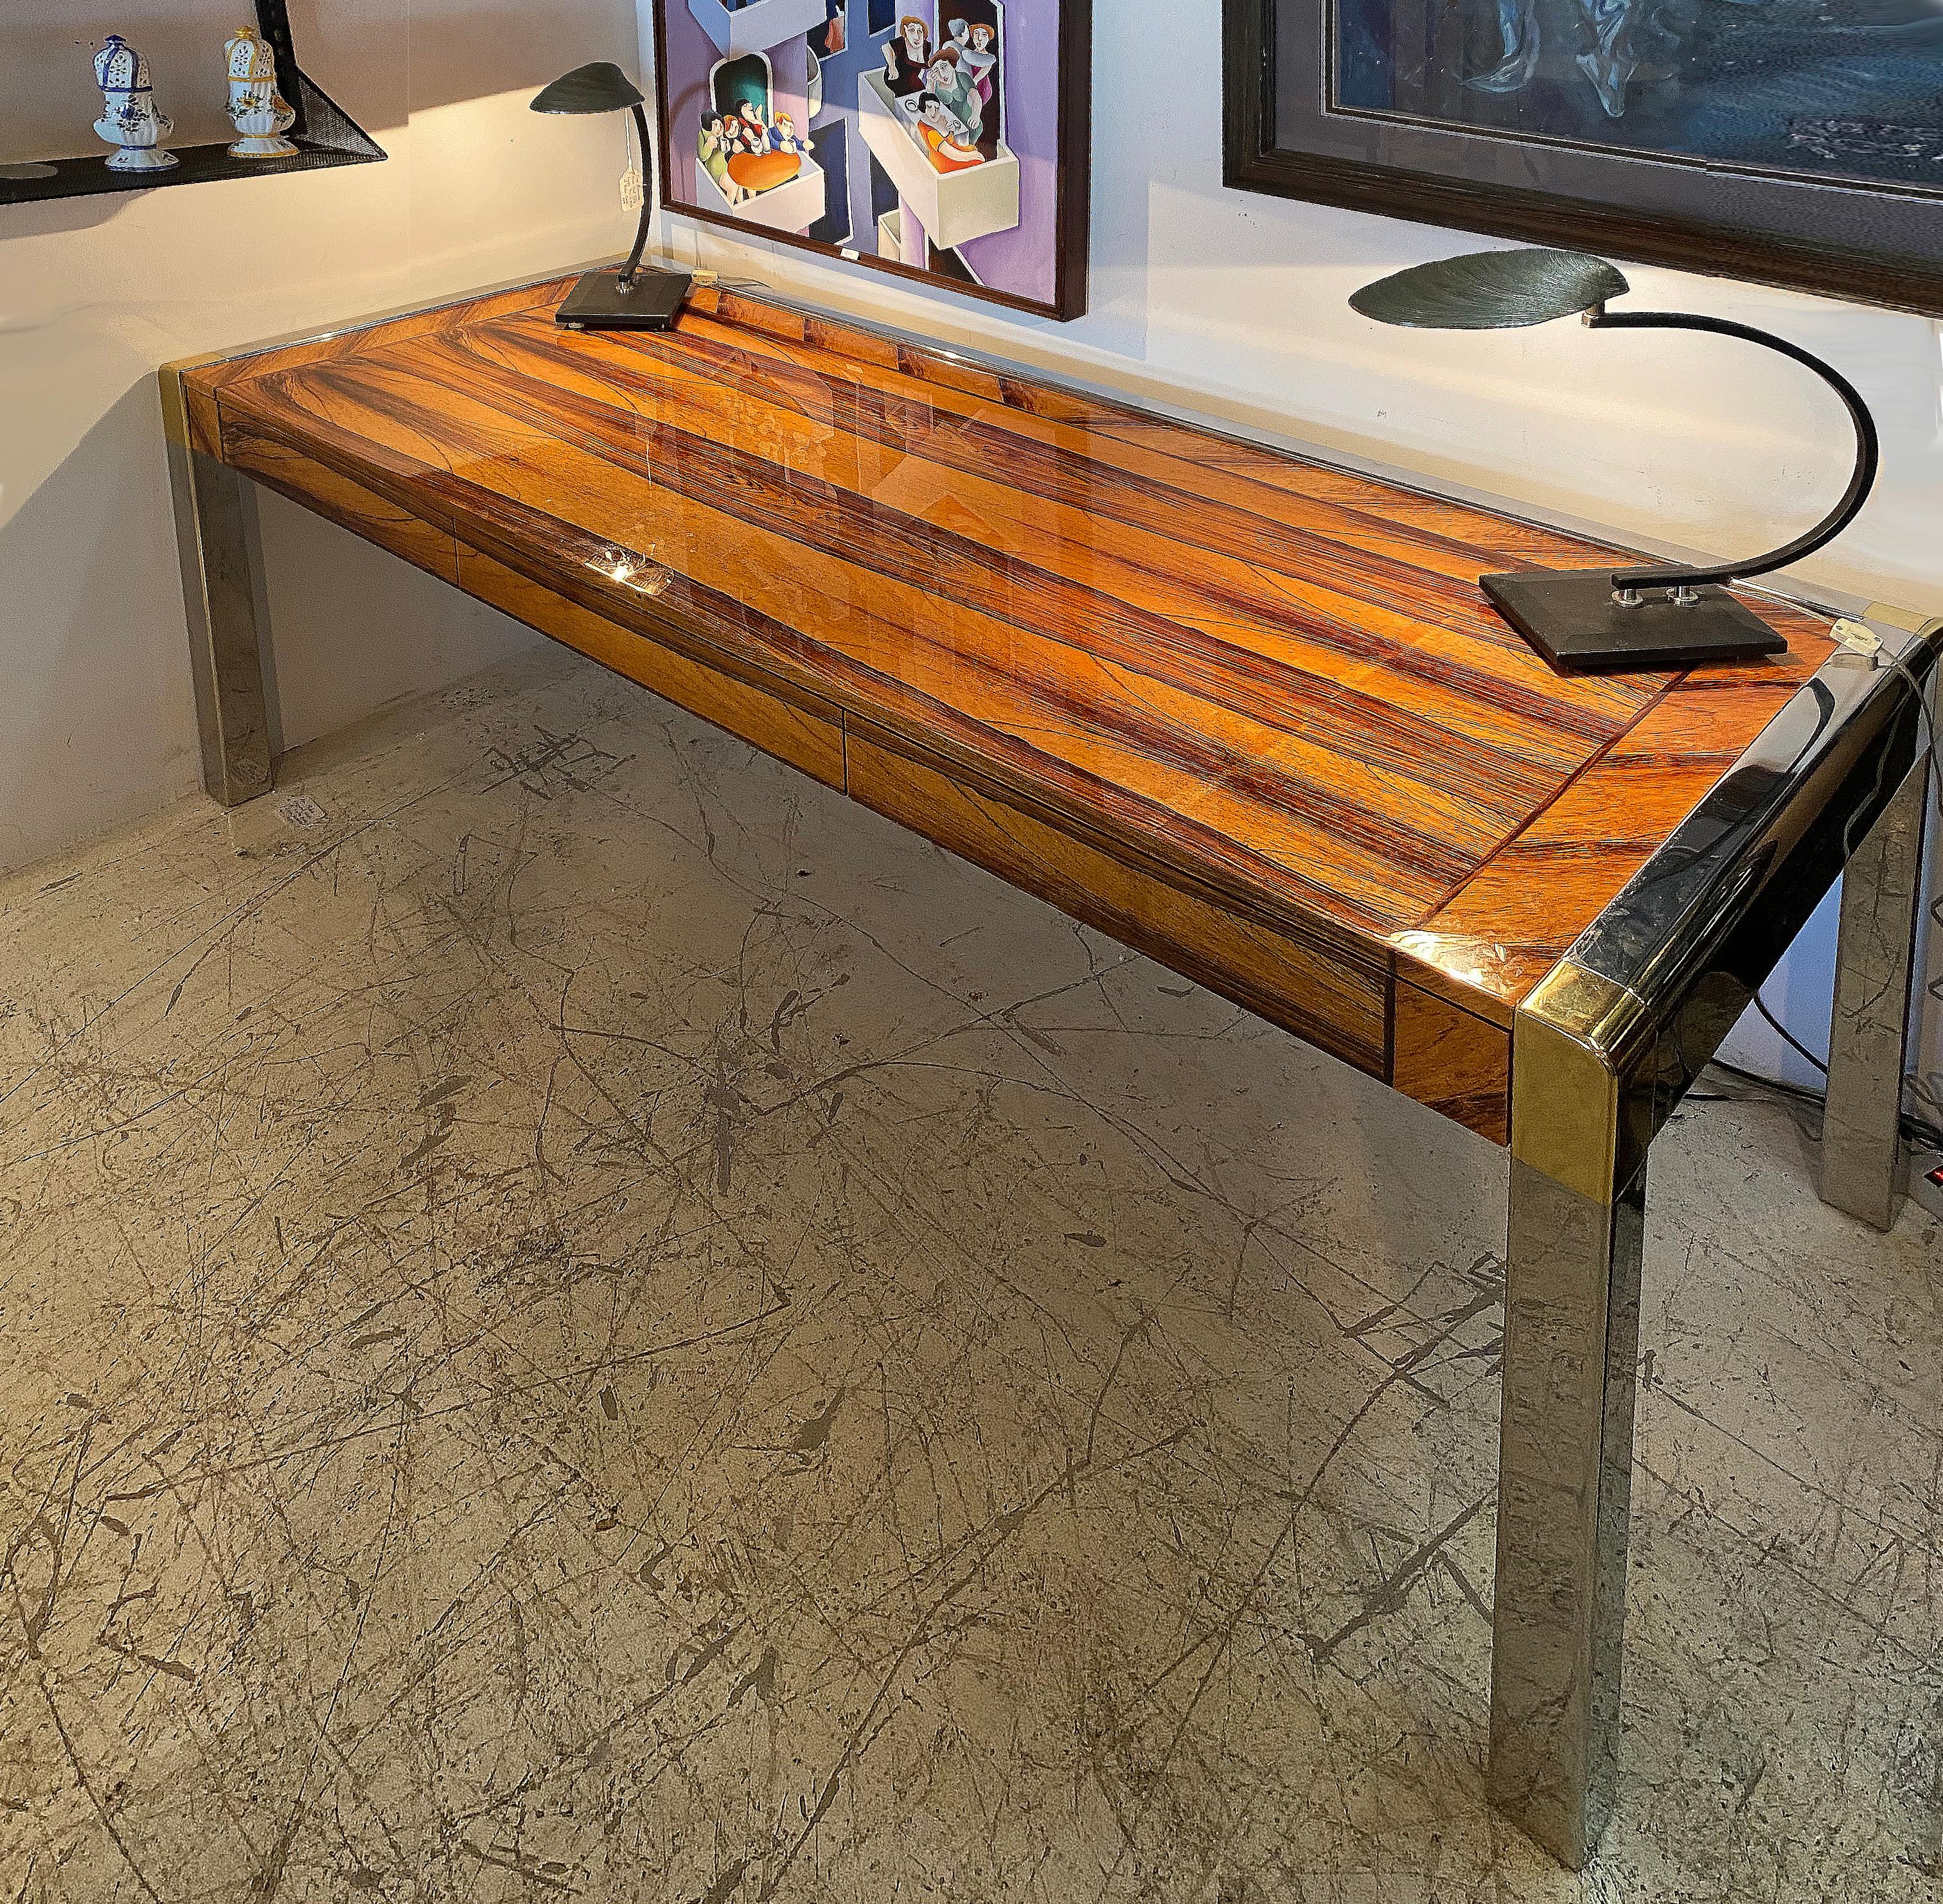 Karl Springer zebrawood writing desk with stainless steel and brass accents

Offered for sale is a highly polished Karl Springer exotic zebrawood writing desk with a stainless steel frame and brass corners. The desk offers storage across the front